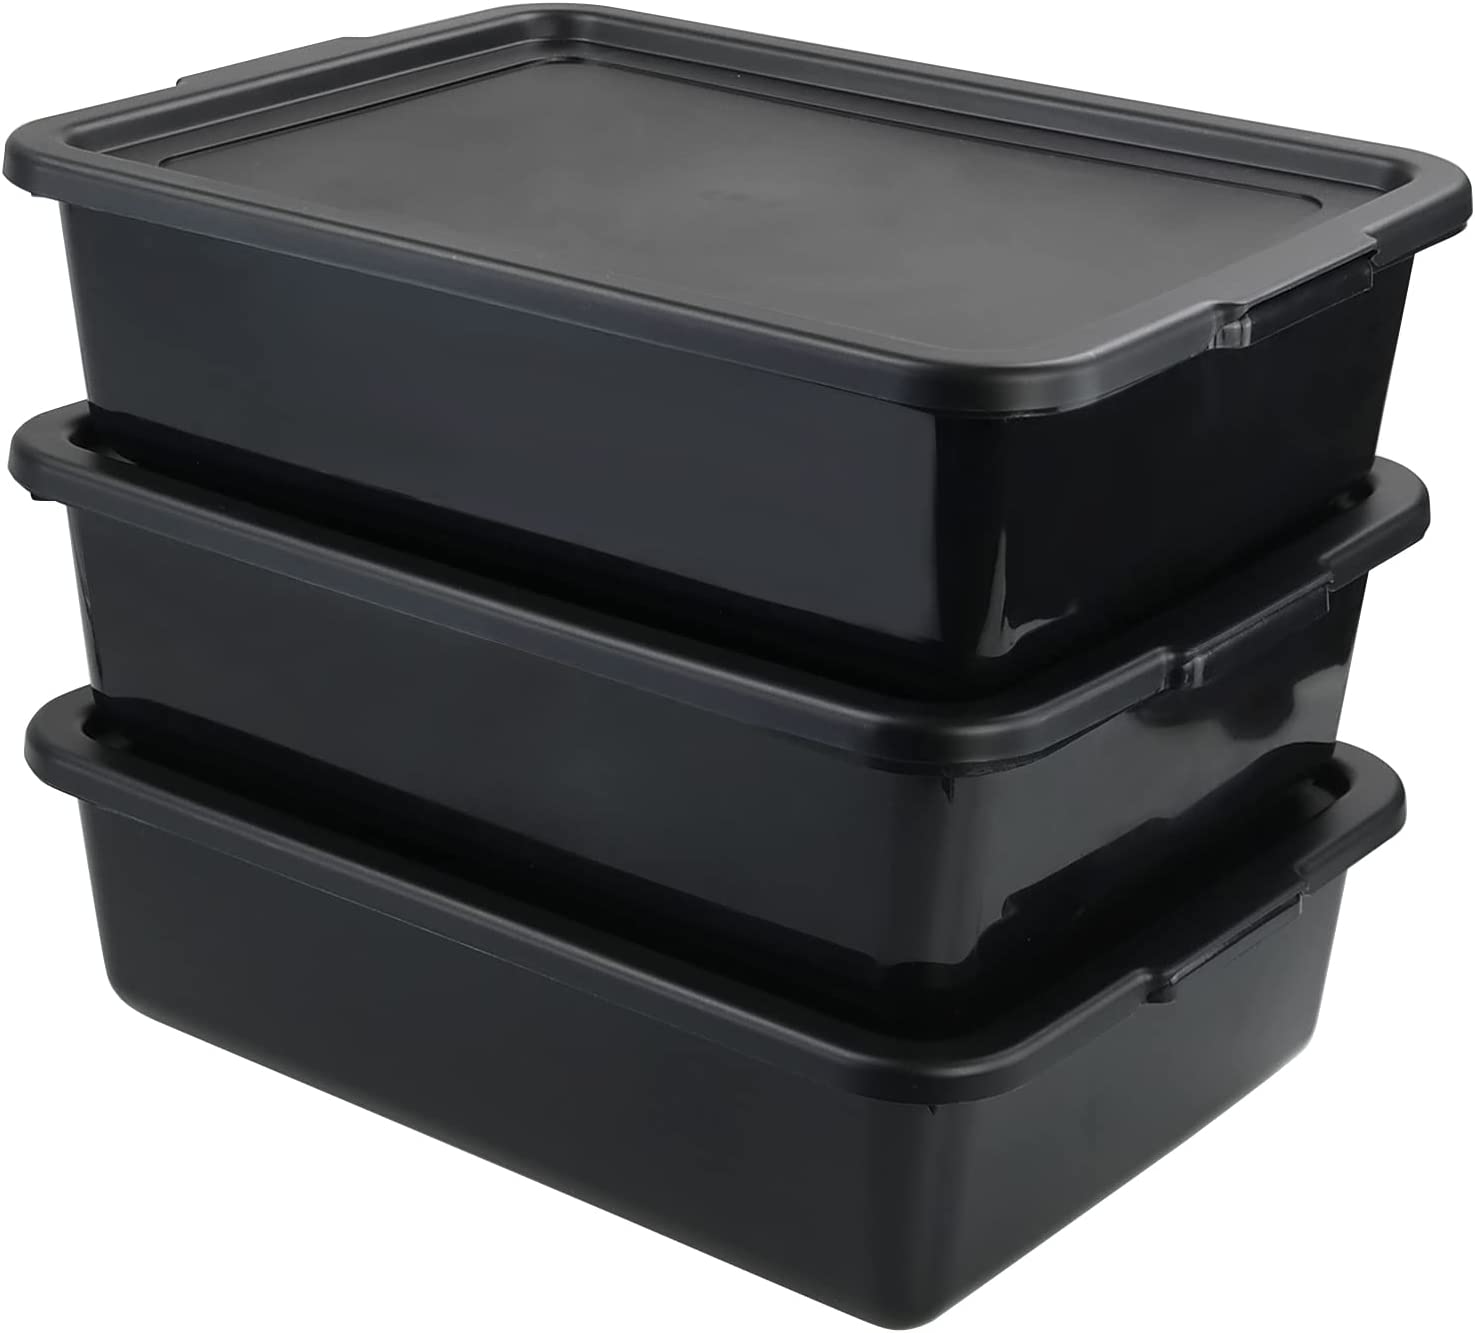 Tyminin Pack of 3 Food Service Bus/Utility Tote Box with Lid, Plastic Restaurant Dish Tub, 13 L, Black